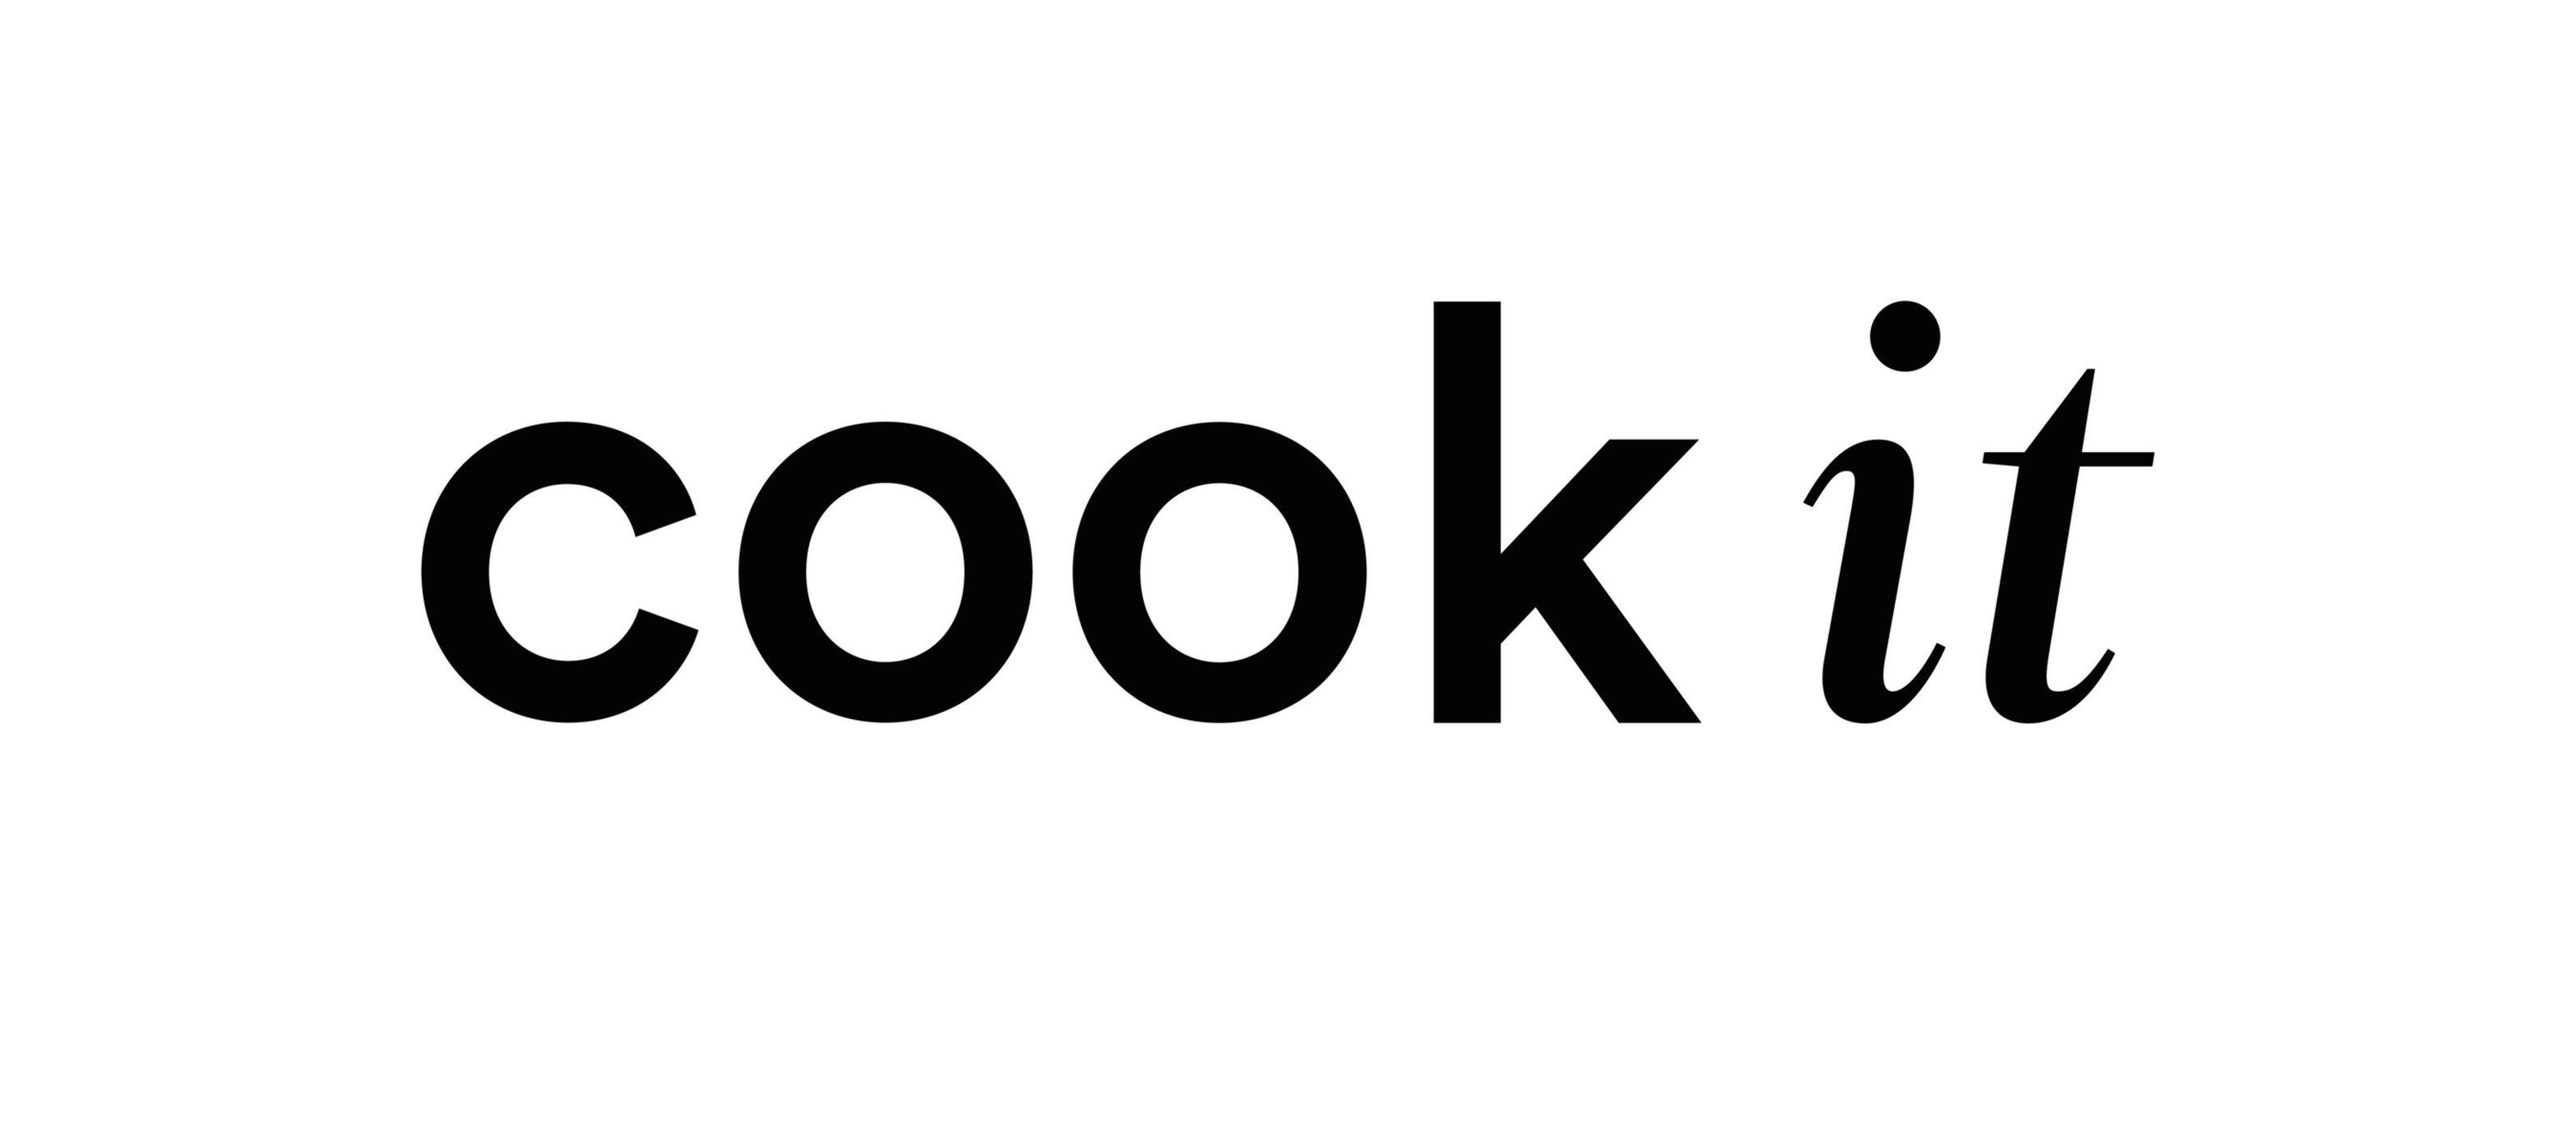 Cook It Cook It Receives A 10M Investment From The Fonds De So